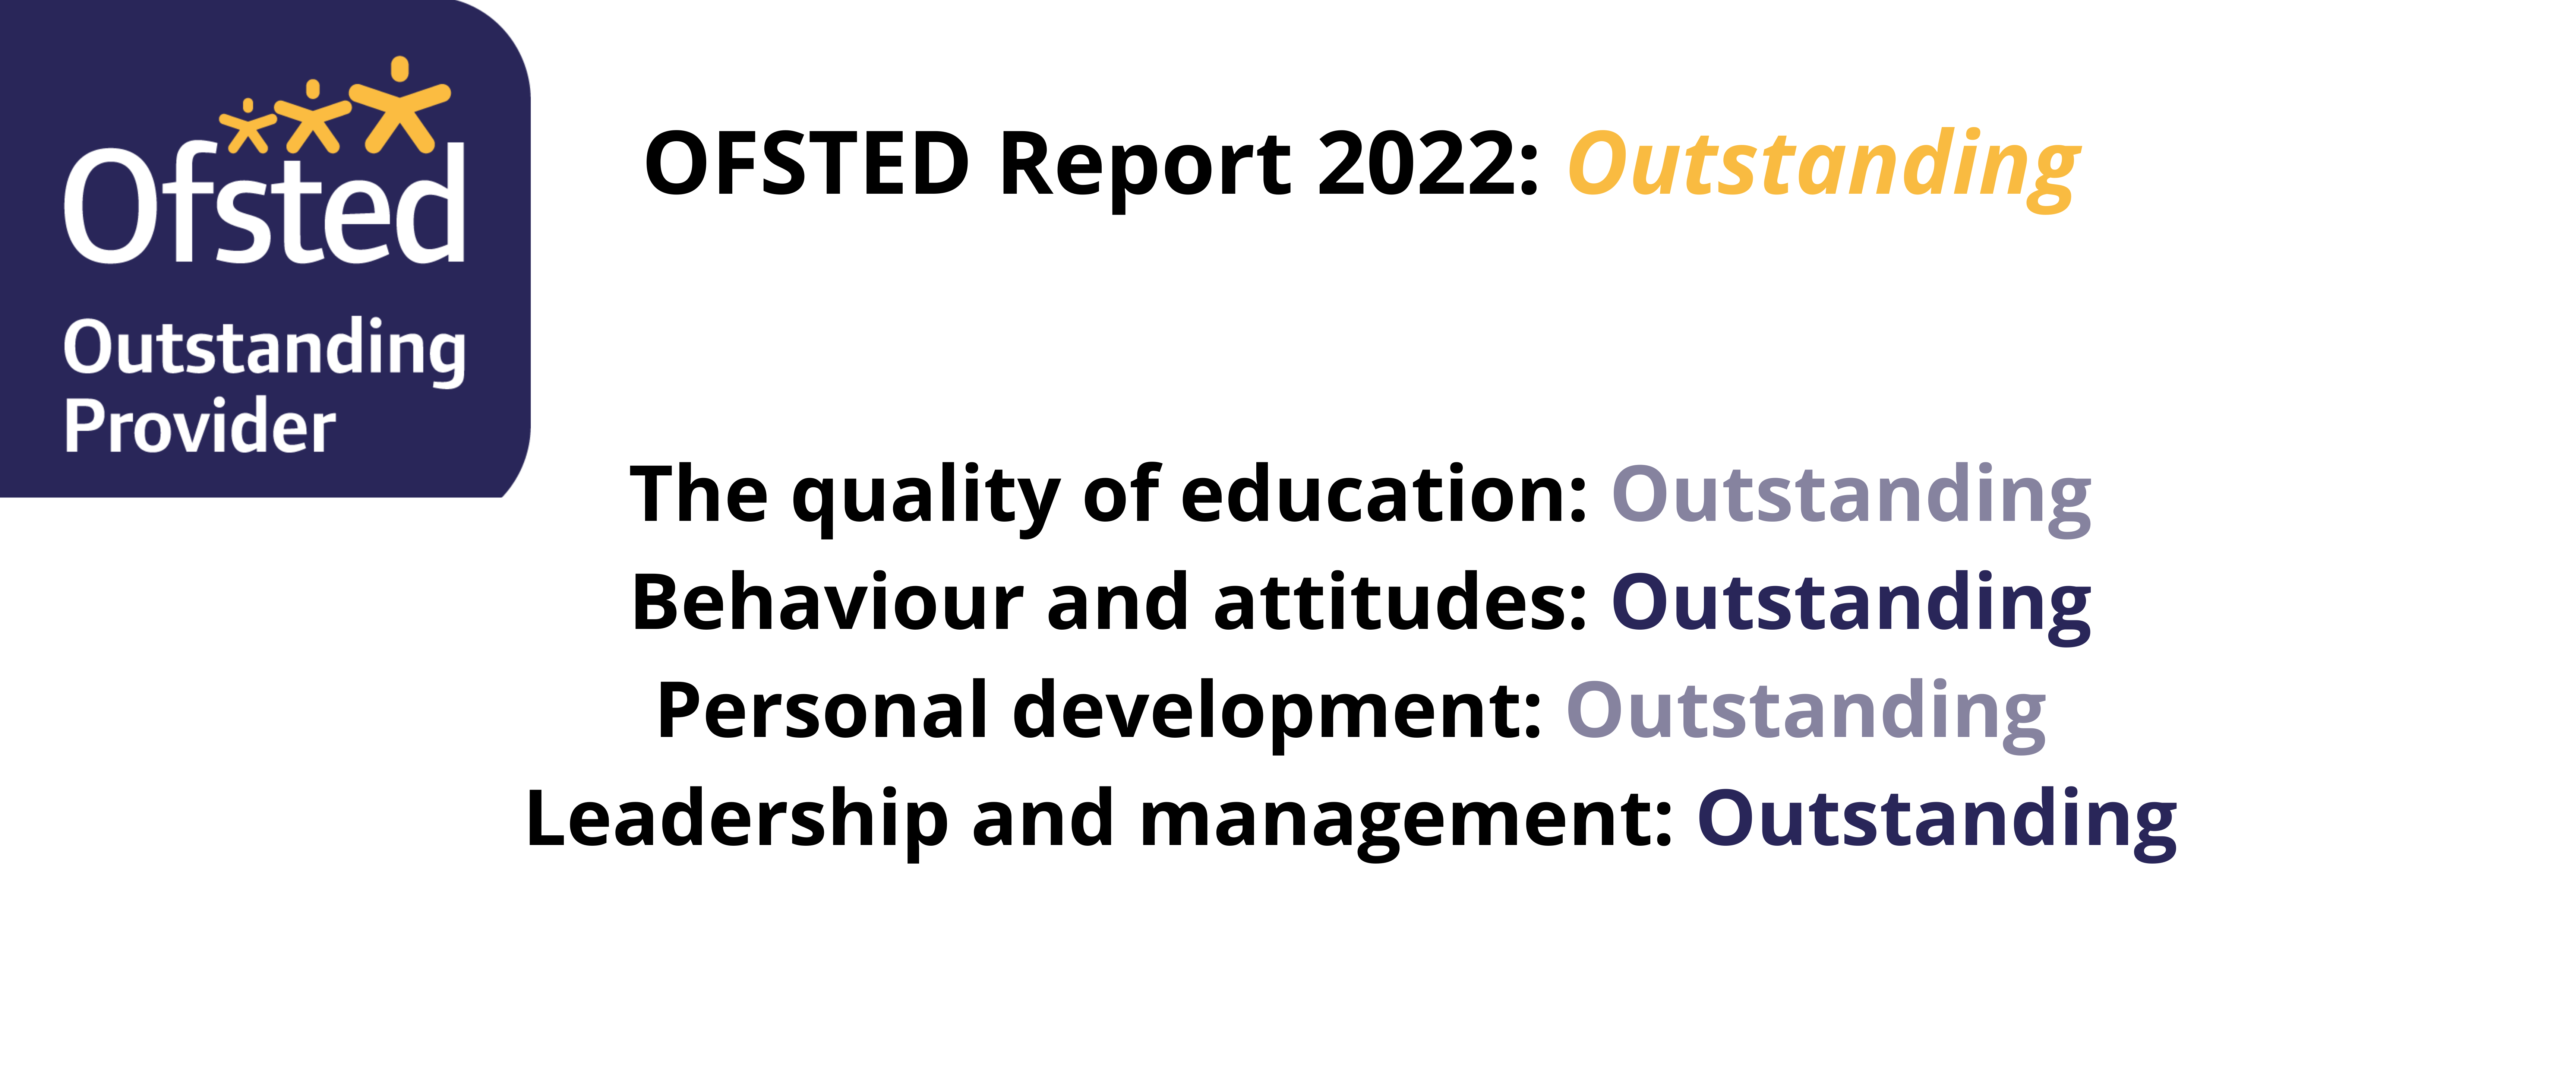 ofsted 2